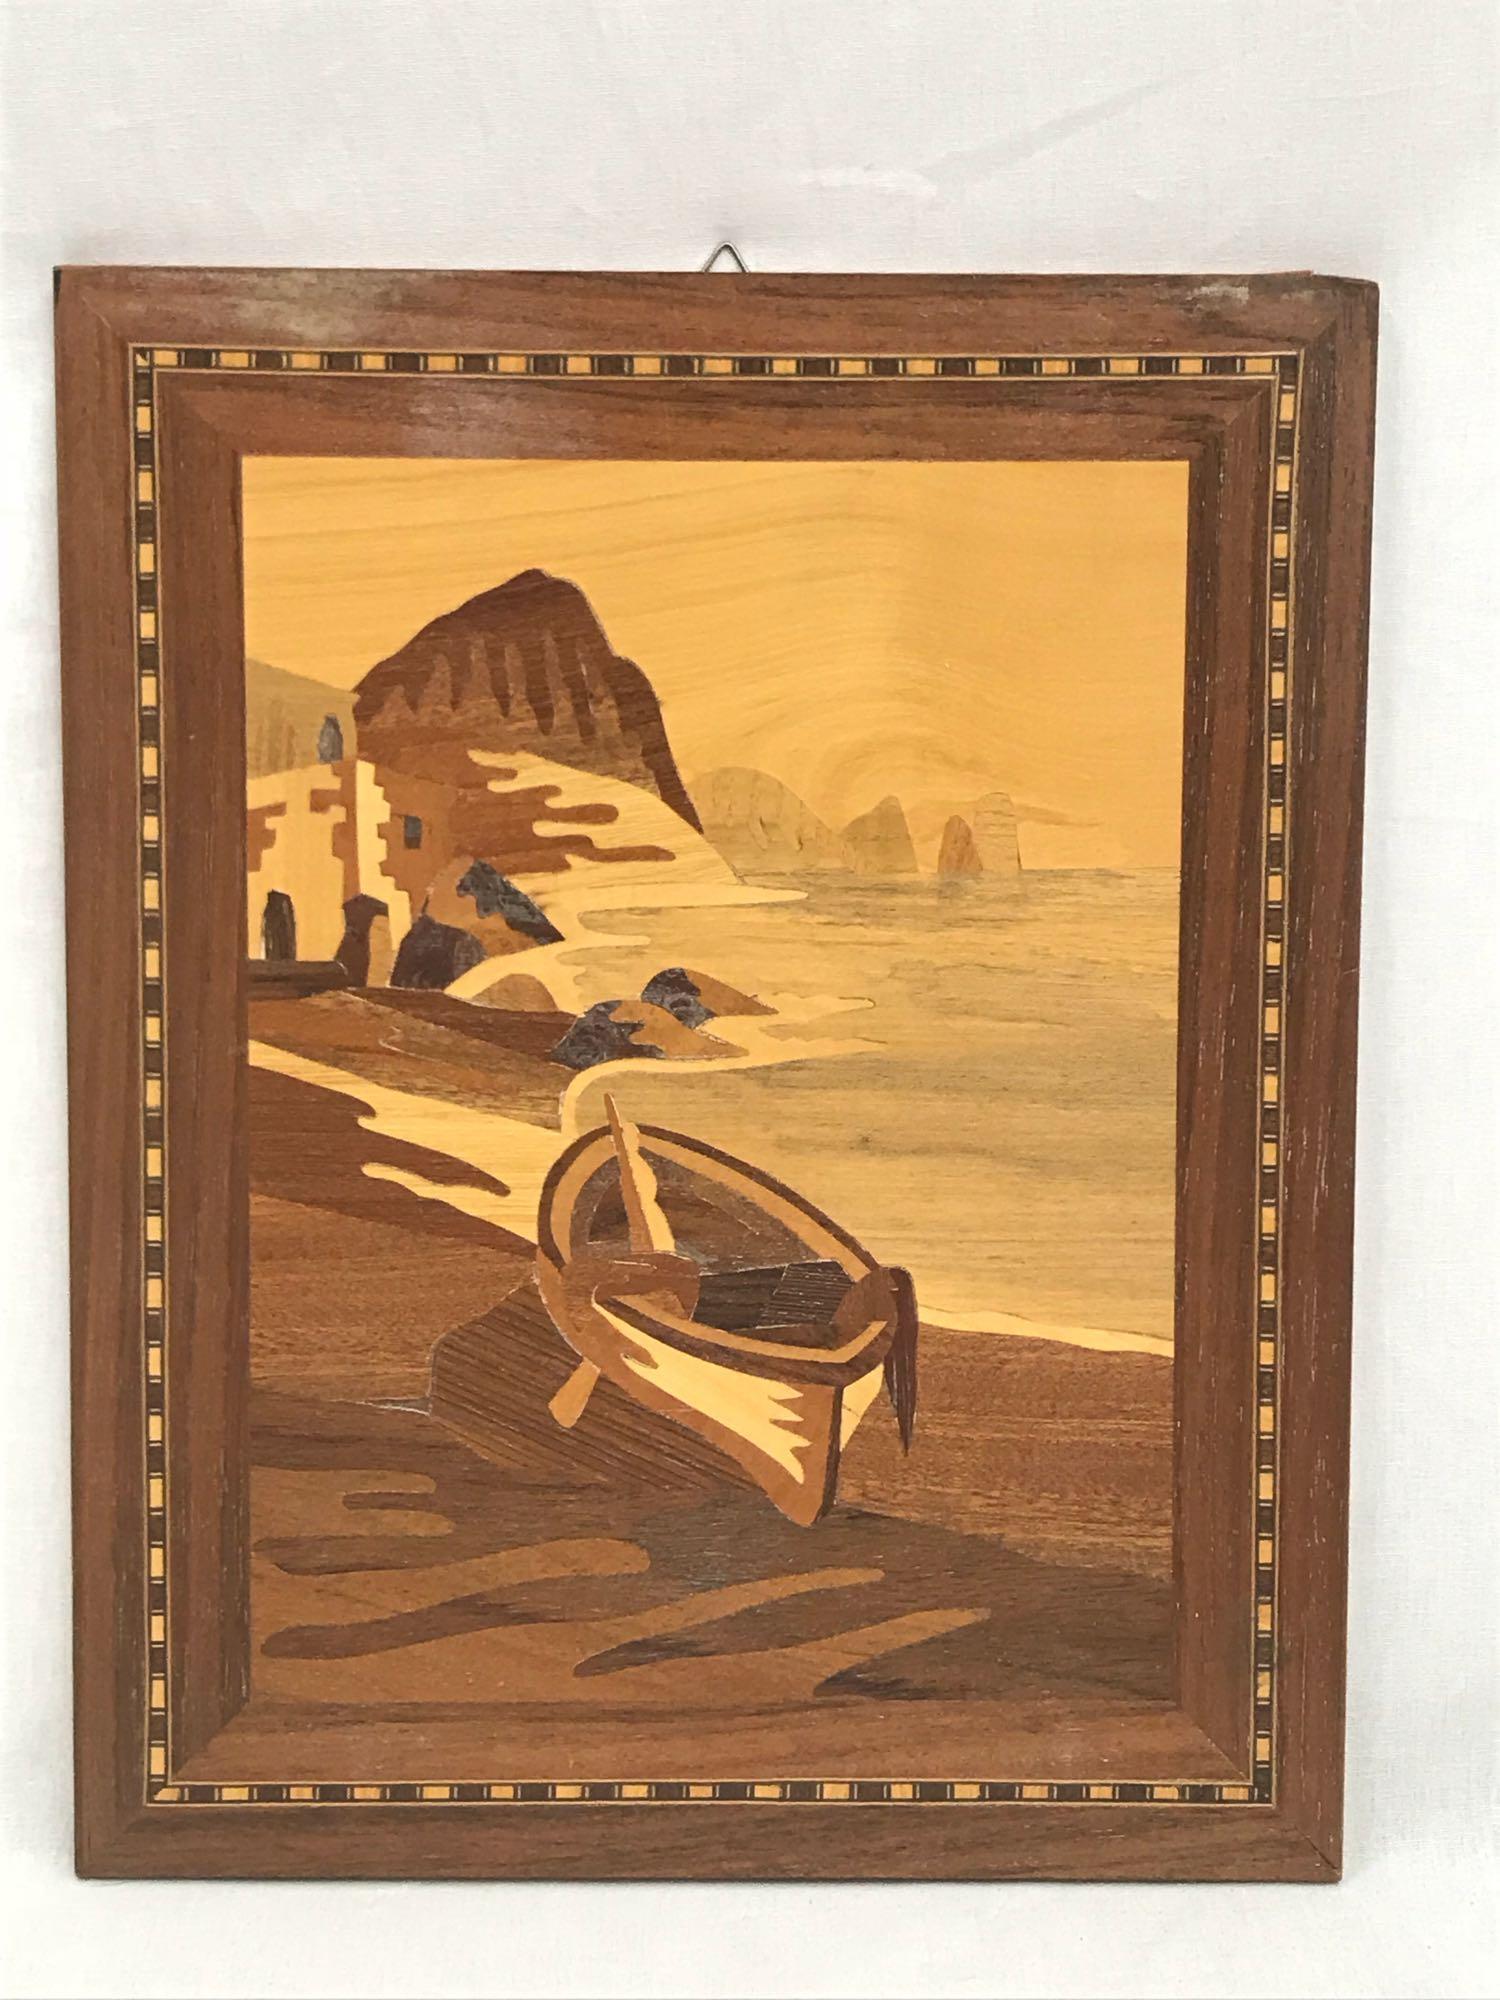 Vintage Marquetry Wood Inlay Art with boat 10 x 12